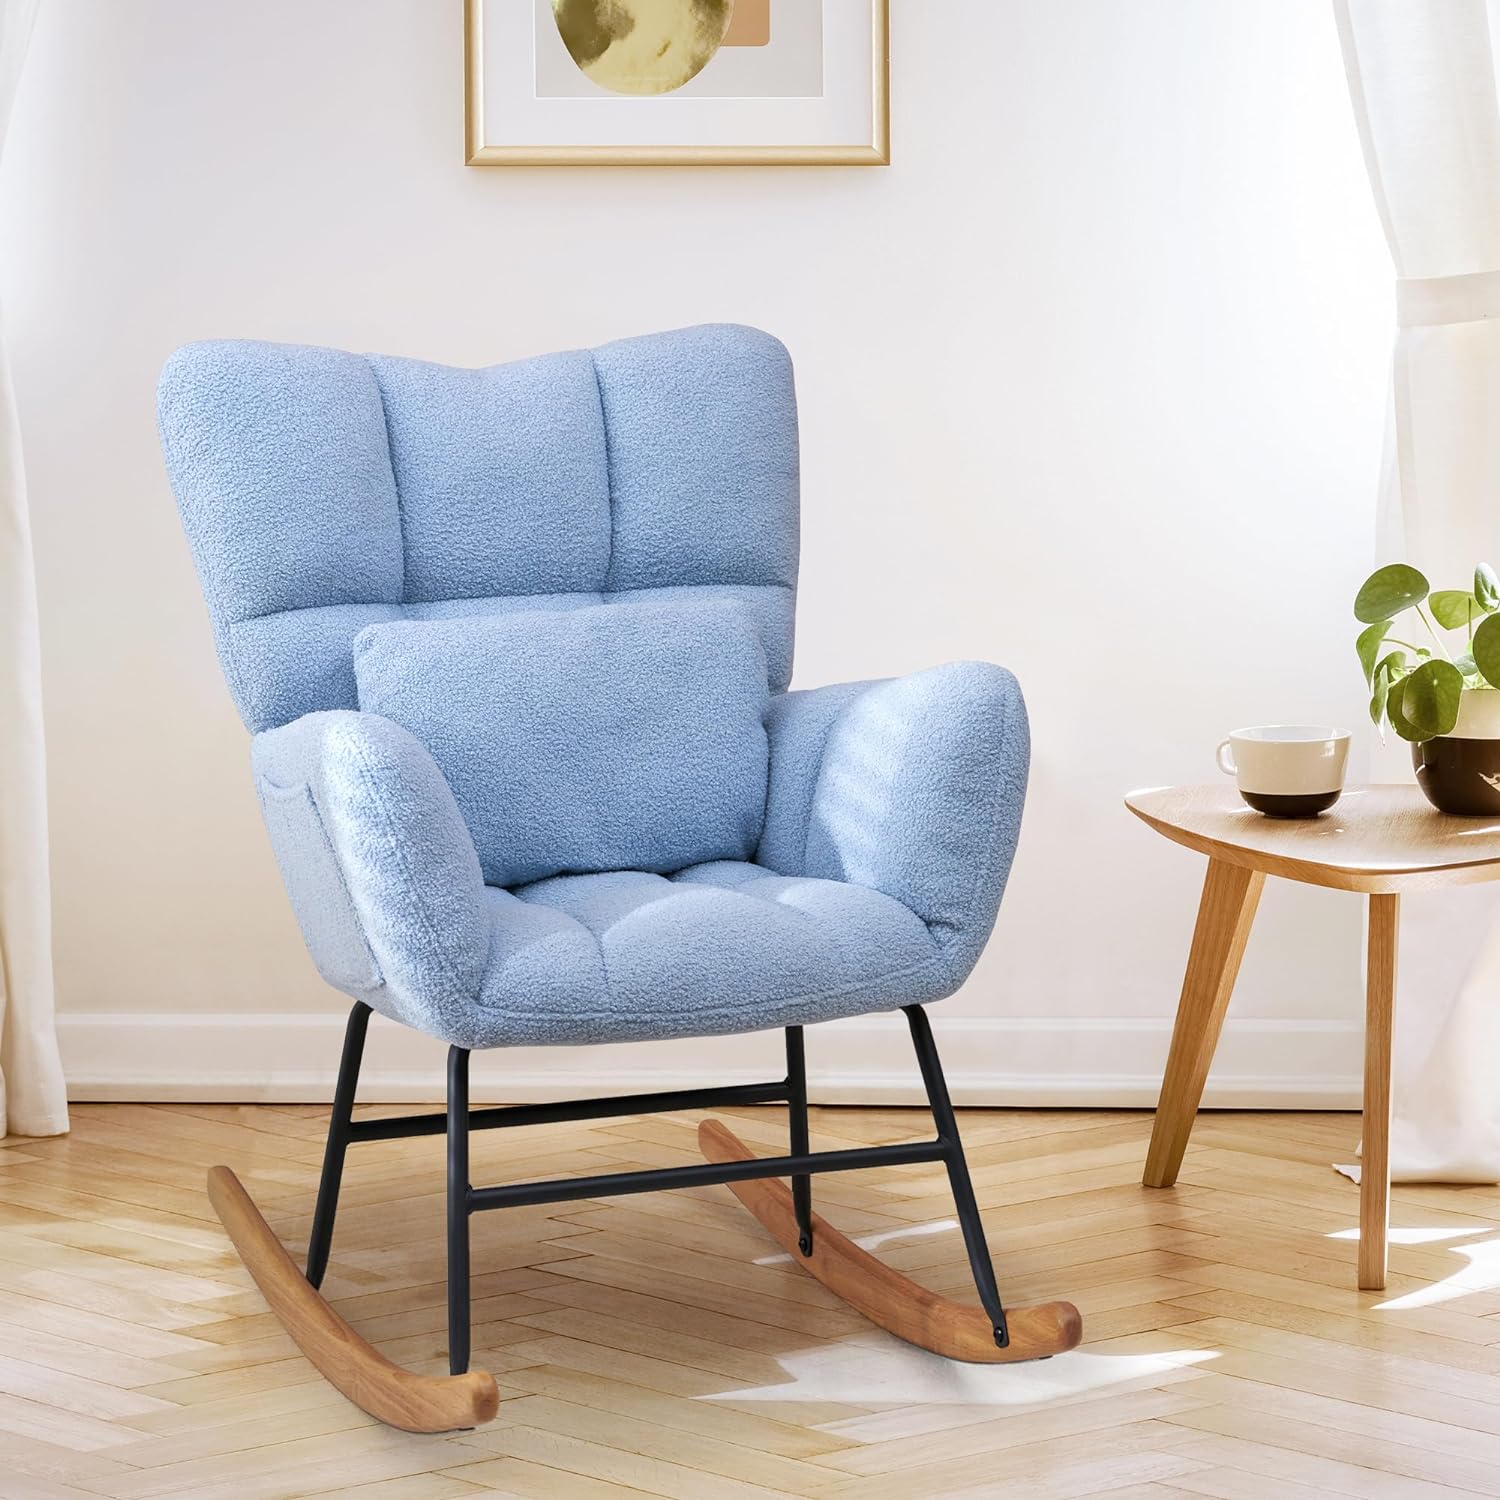 HABUTWAY Nursery Rocking Chair with Cushion, Teddy Fabric Rocker Glider Chair, Rocker Armchair with Solid Wood Legs & High Backrest, for Living Room, Bedroom, Balcony (Sweet Blue)